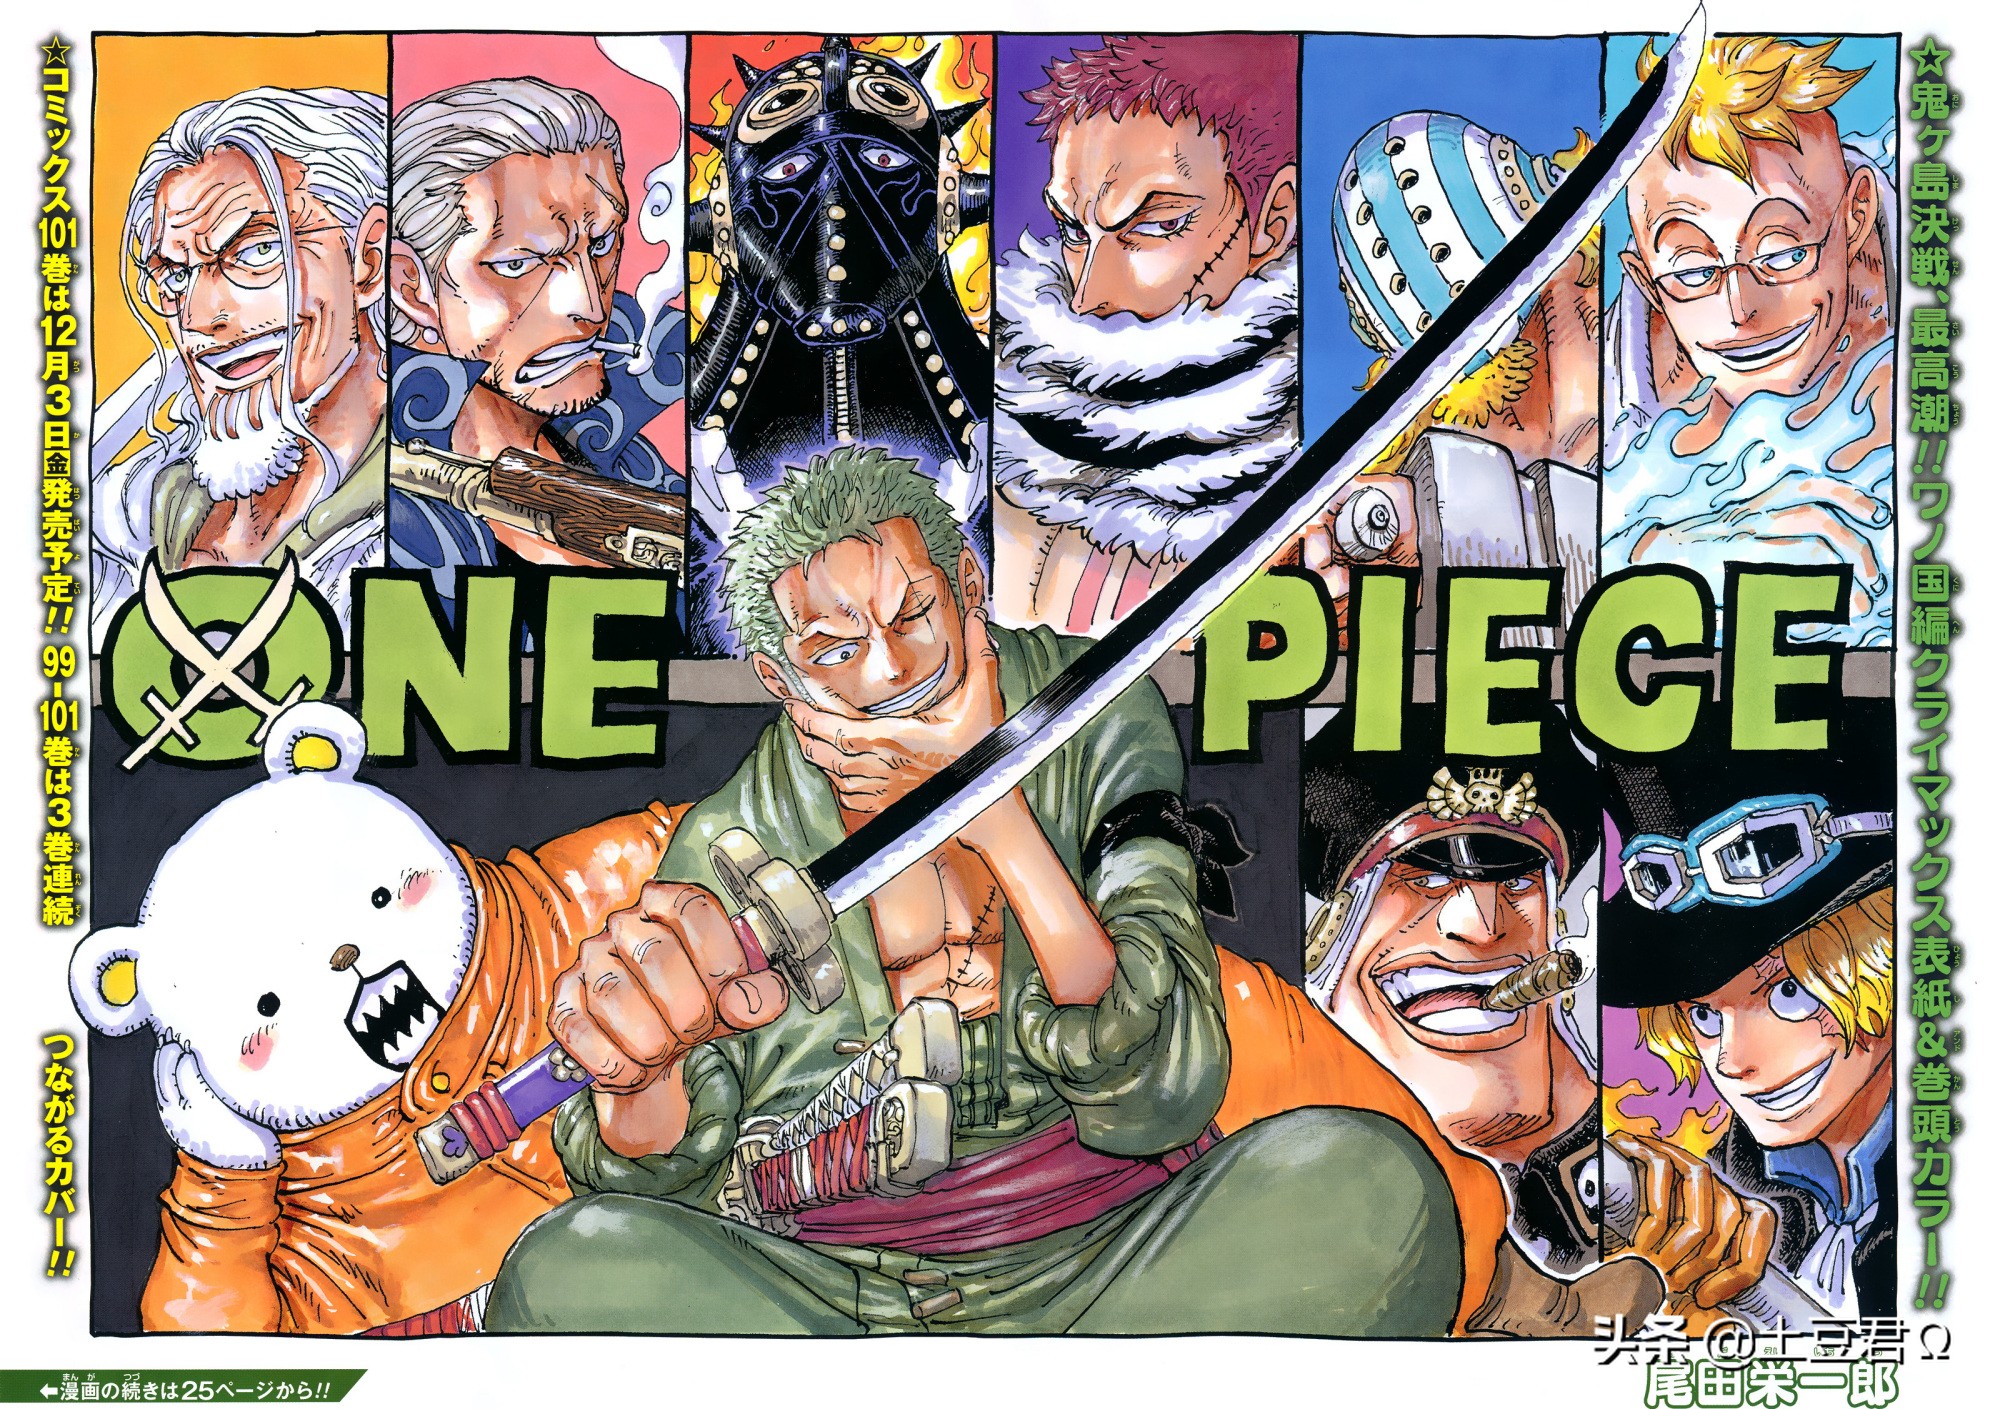 The Second In Command In One Piece Oda Selects 10 People And The Lowest Bounty Is Only 500 Bergs Inews